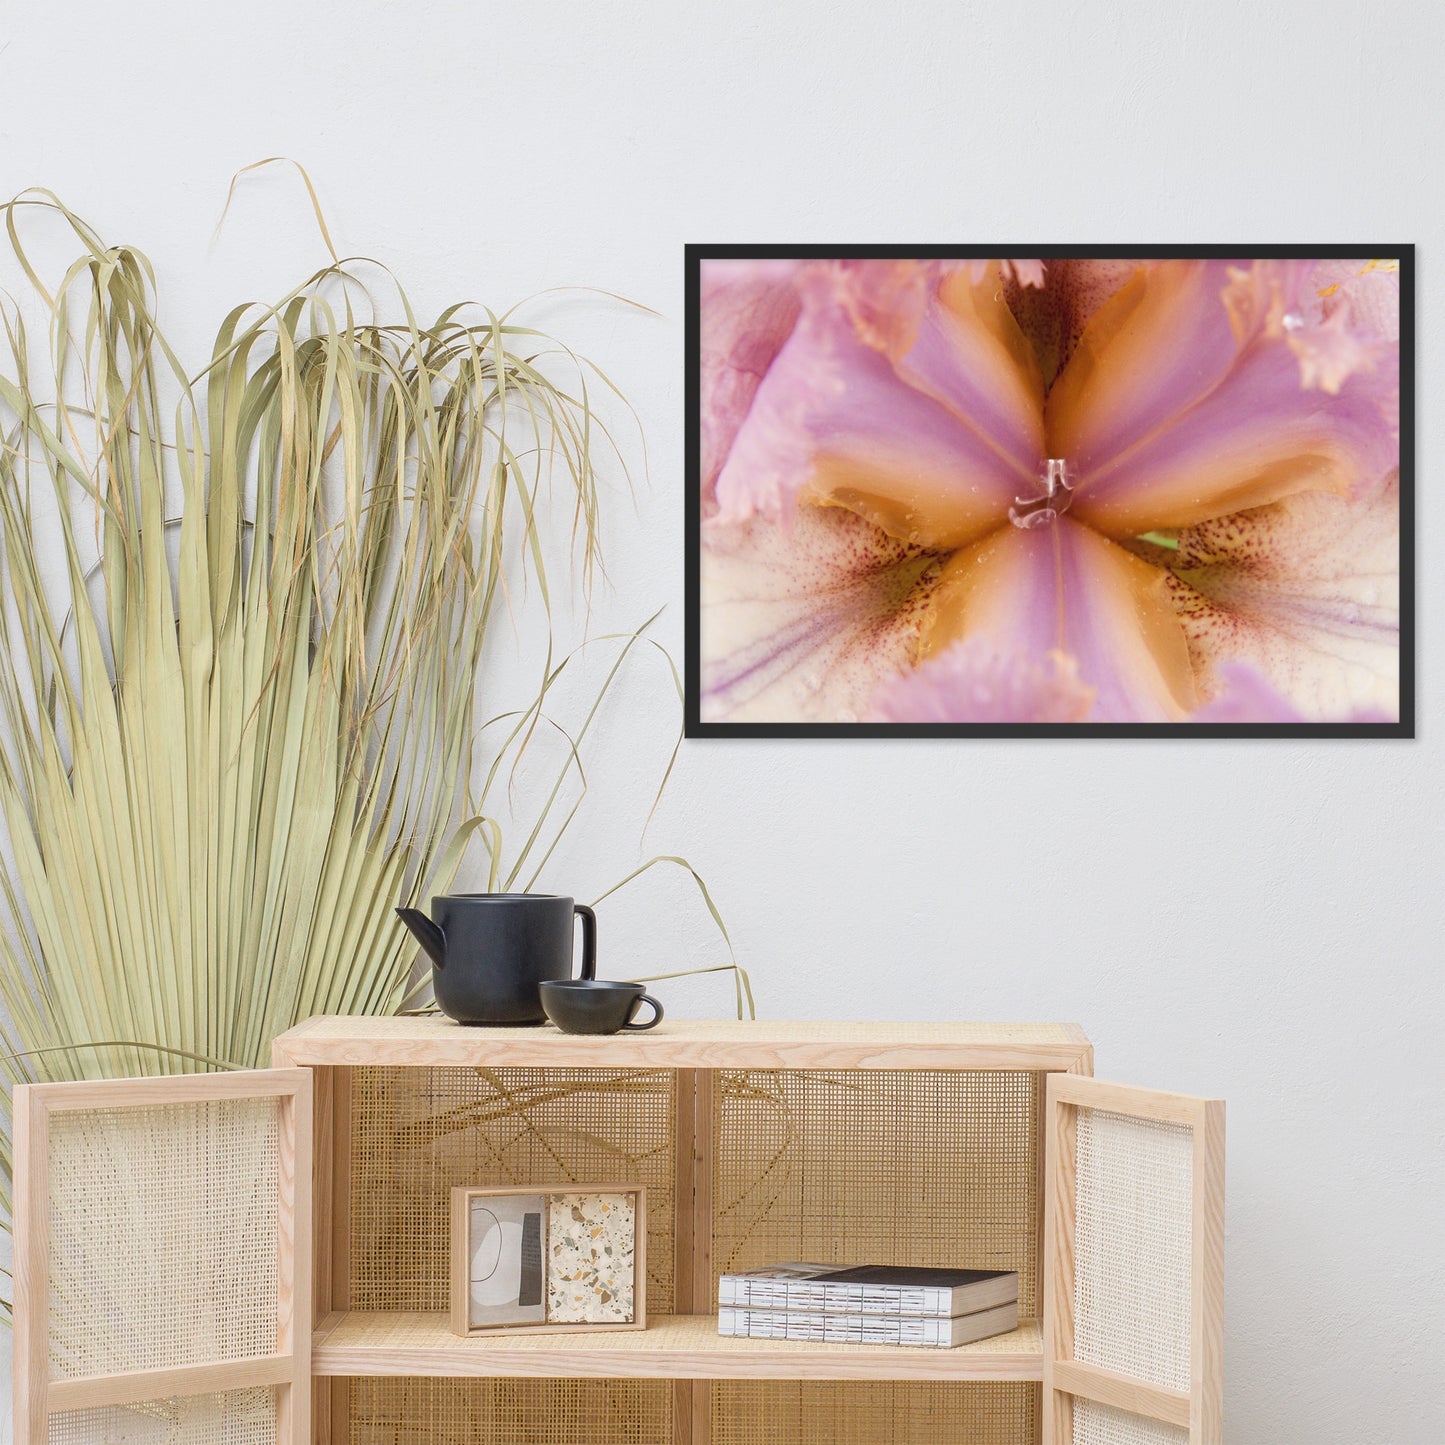 Symmetry of Nature Floral Nature Photo Framed Wall Art Print